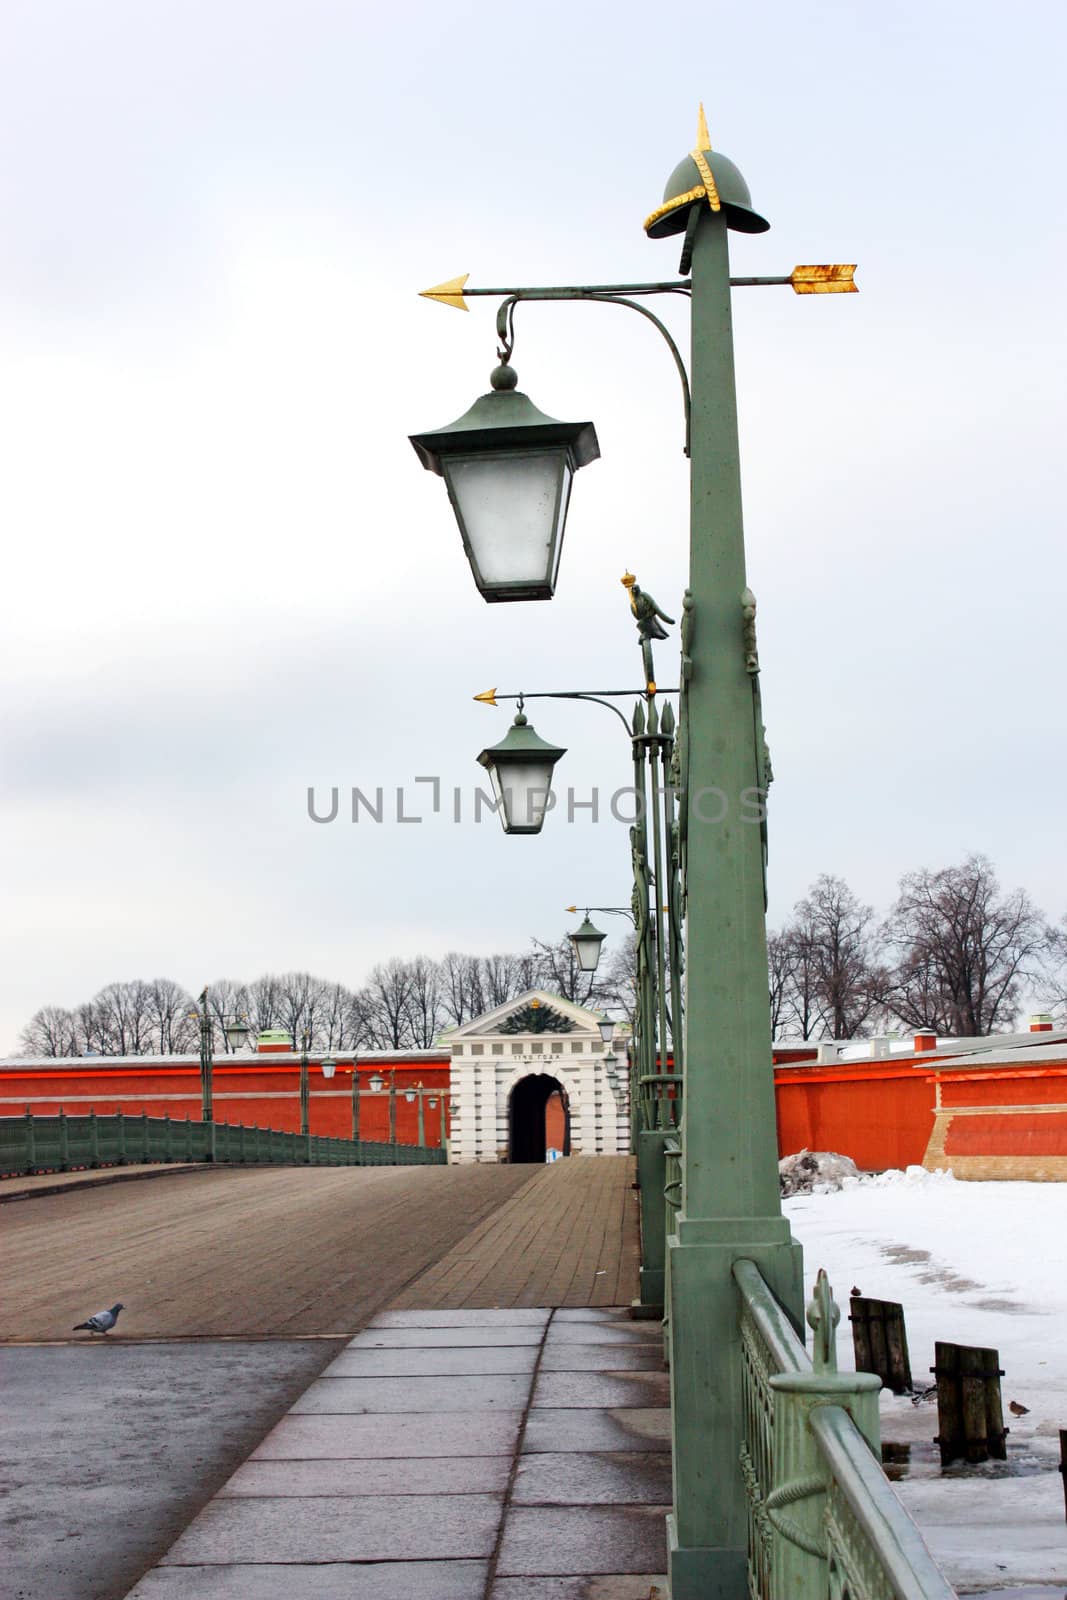 Peter and Paul Fortress, the bridge with lights, a fence on the bridge, dove, the entrance to krepos, the gate to the fortress, a symbol of Russia, a symbol of St. Petersburg